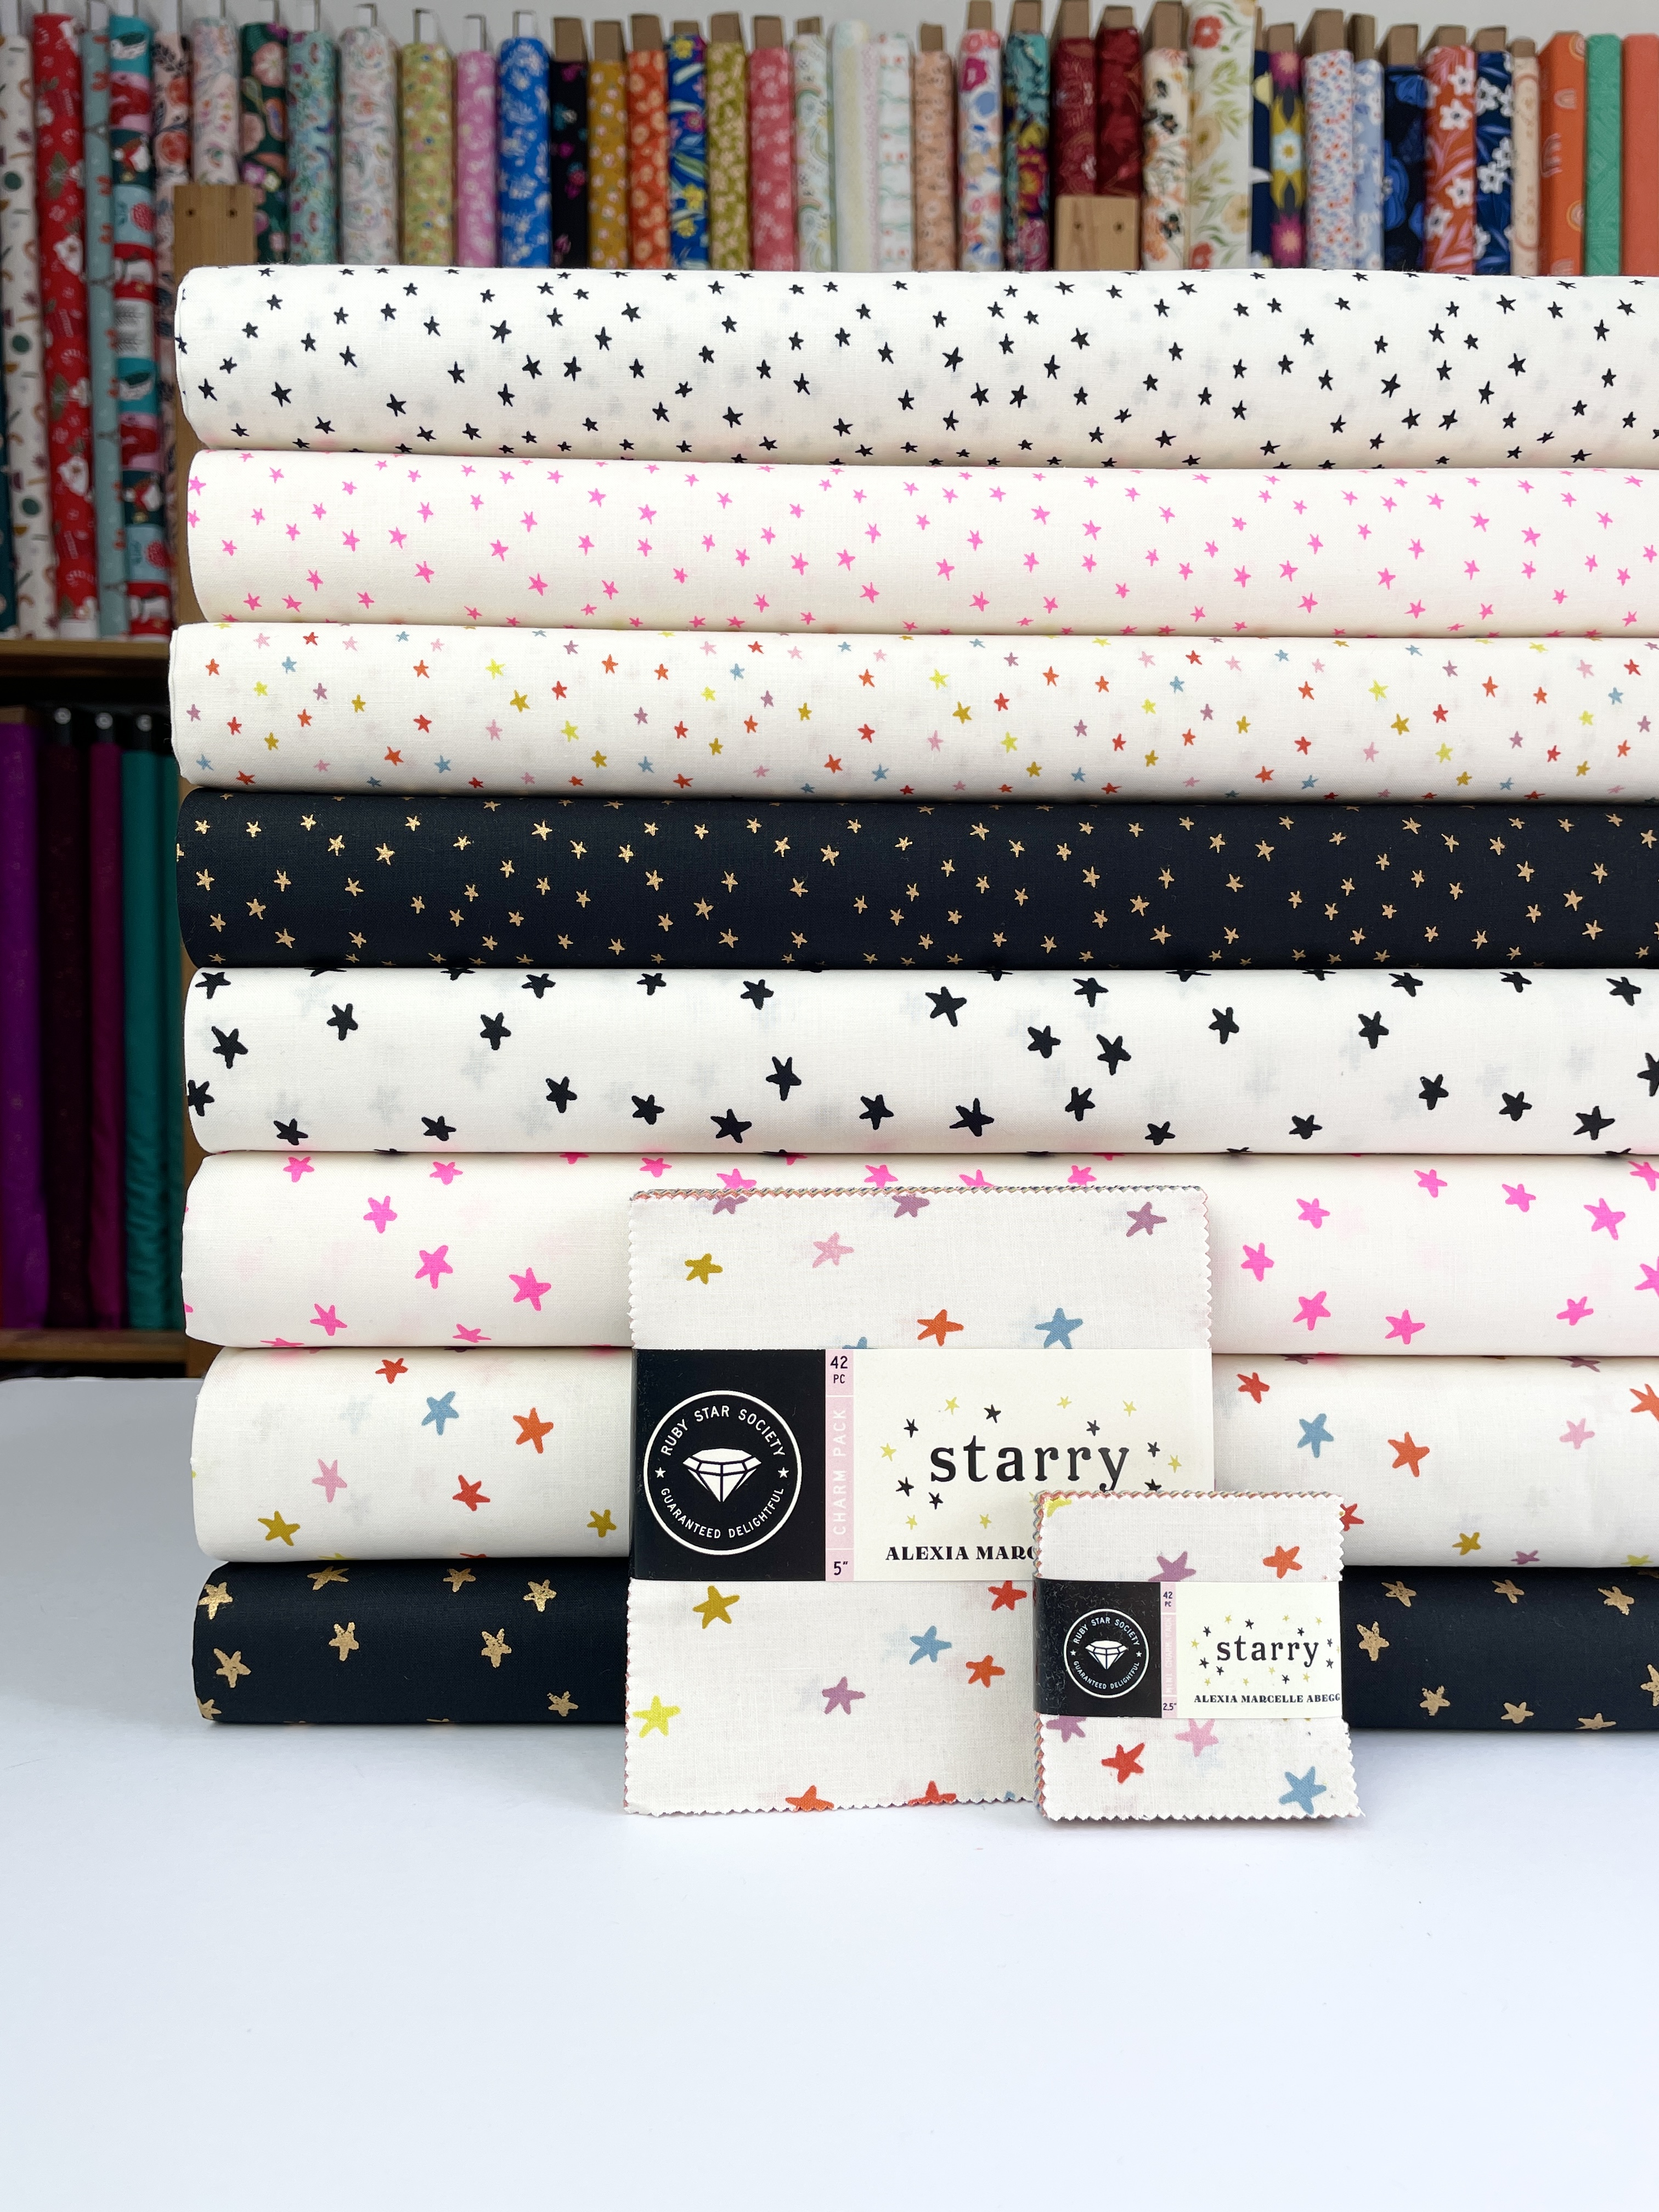 Modern patchwork and quilting fabric from the Starry collection designed by Alexia Marcelle Abegg for Ruby Star Society